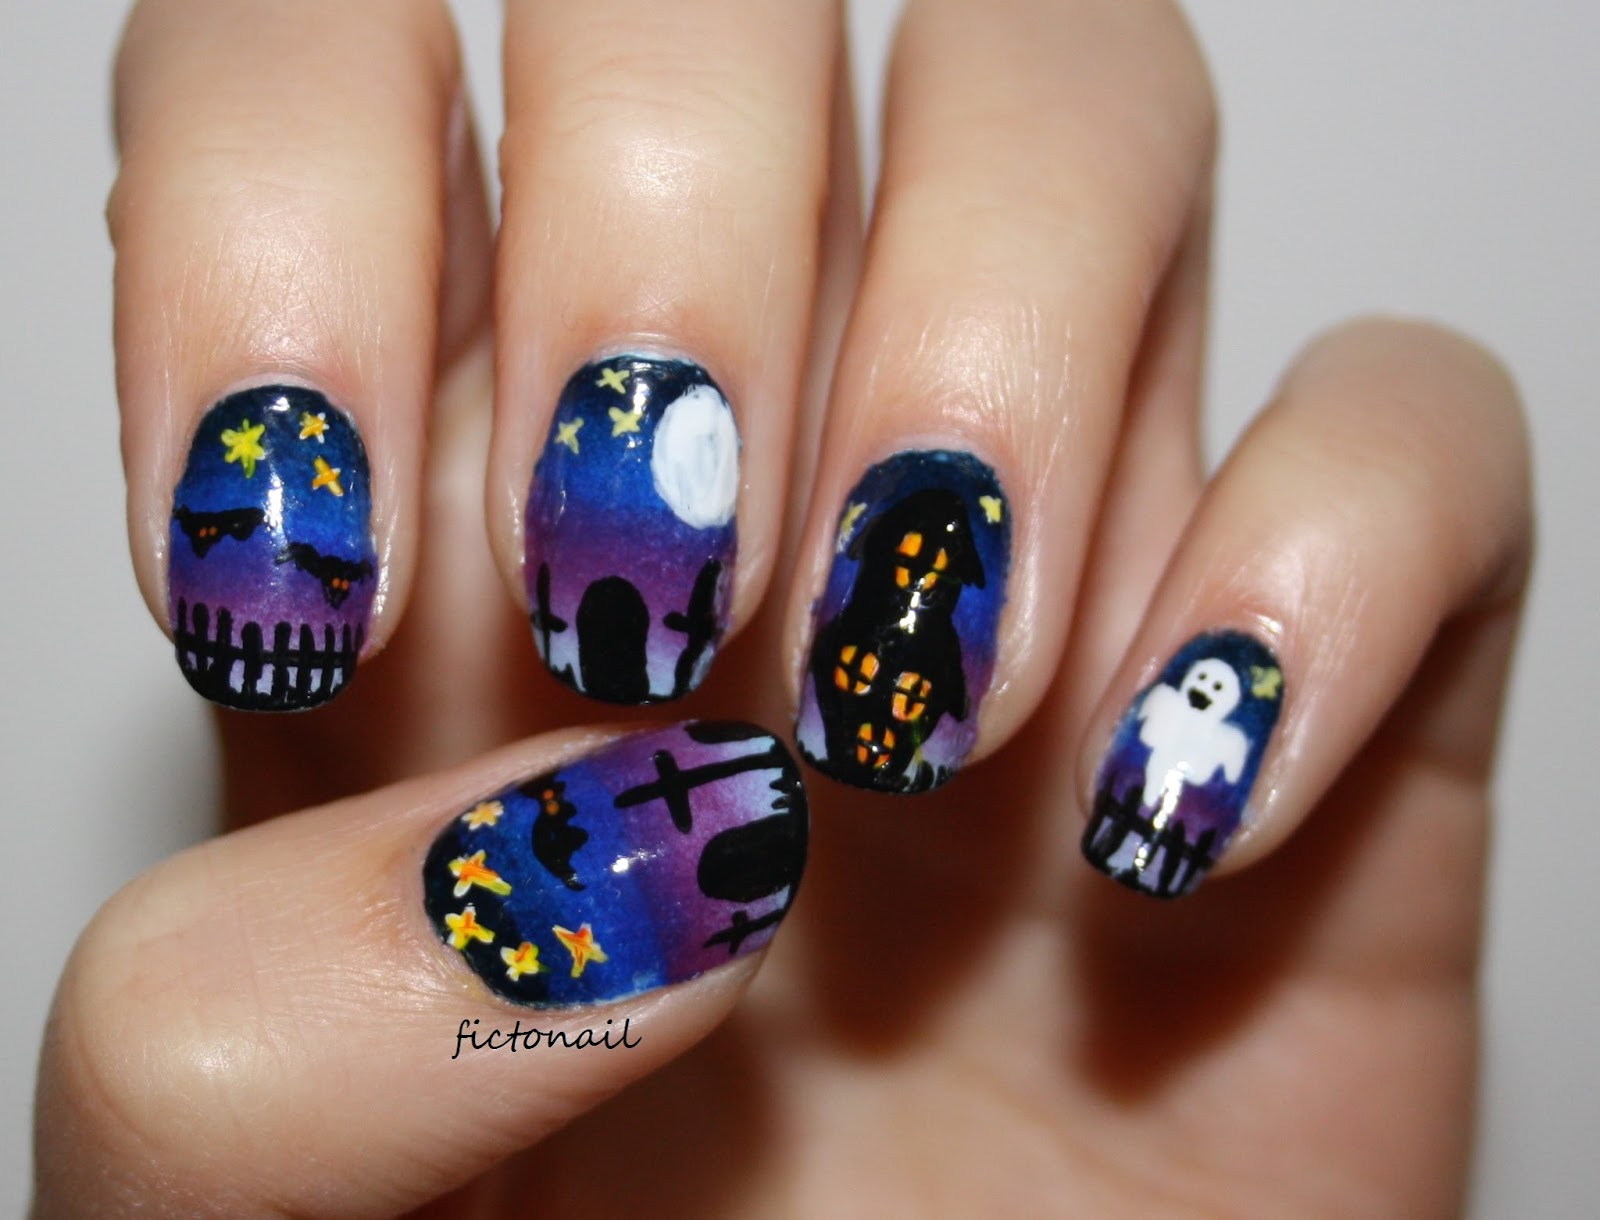 8. "Haunted house nail art tutorial" - wide 1